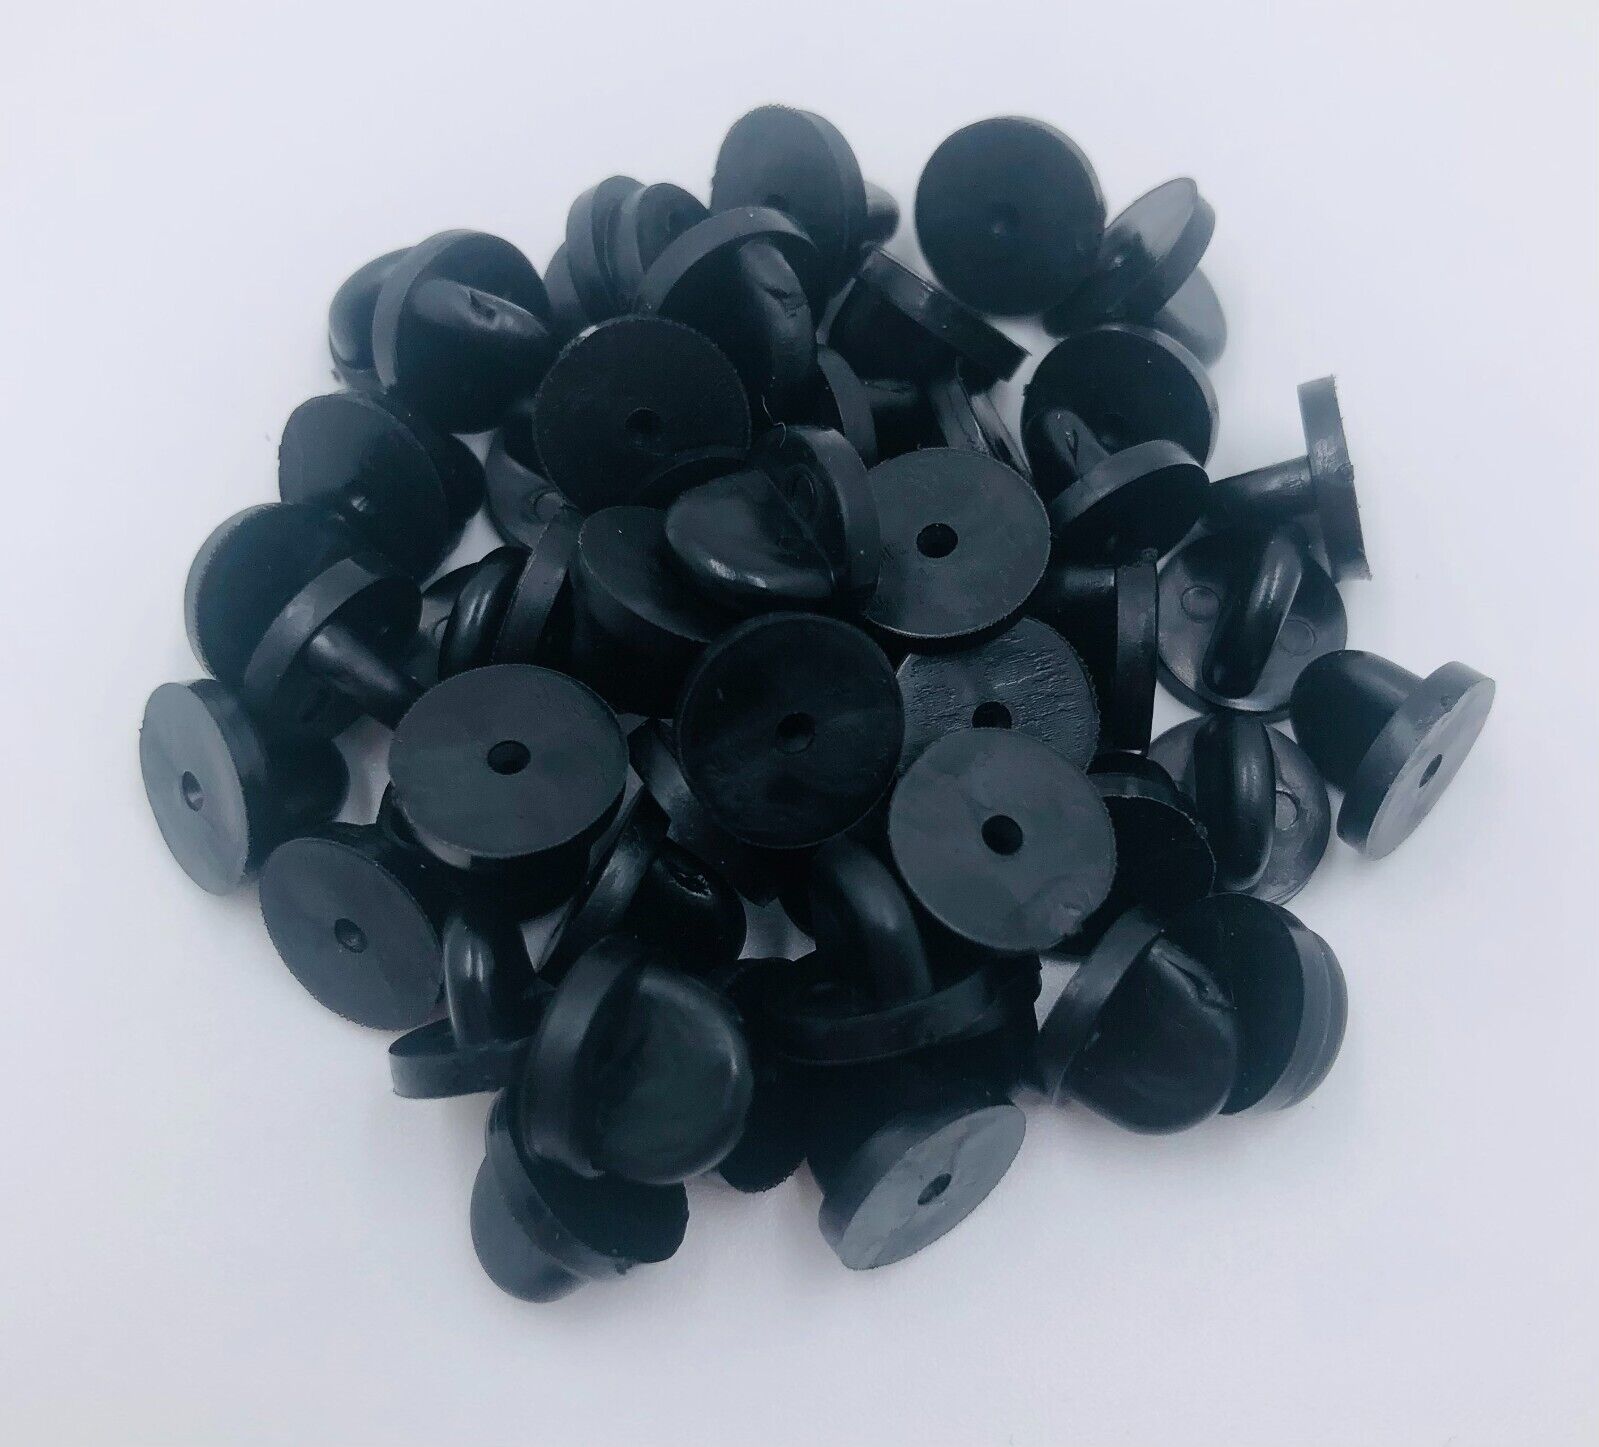 20 Black Rubber Pin Backs Lapel Pin Backs Pin Safety Back Brooch Tie Replacement